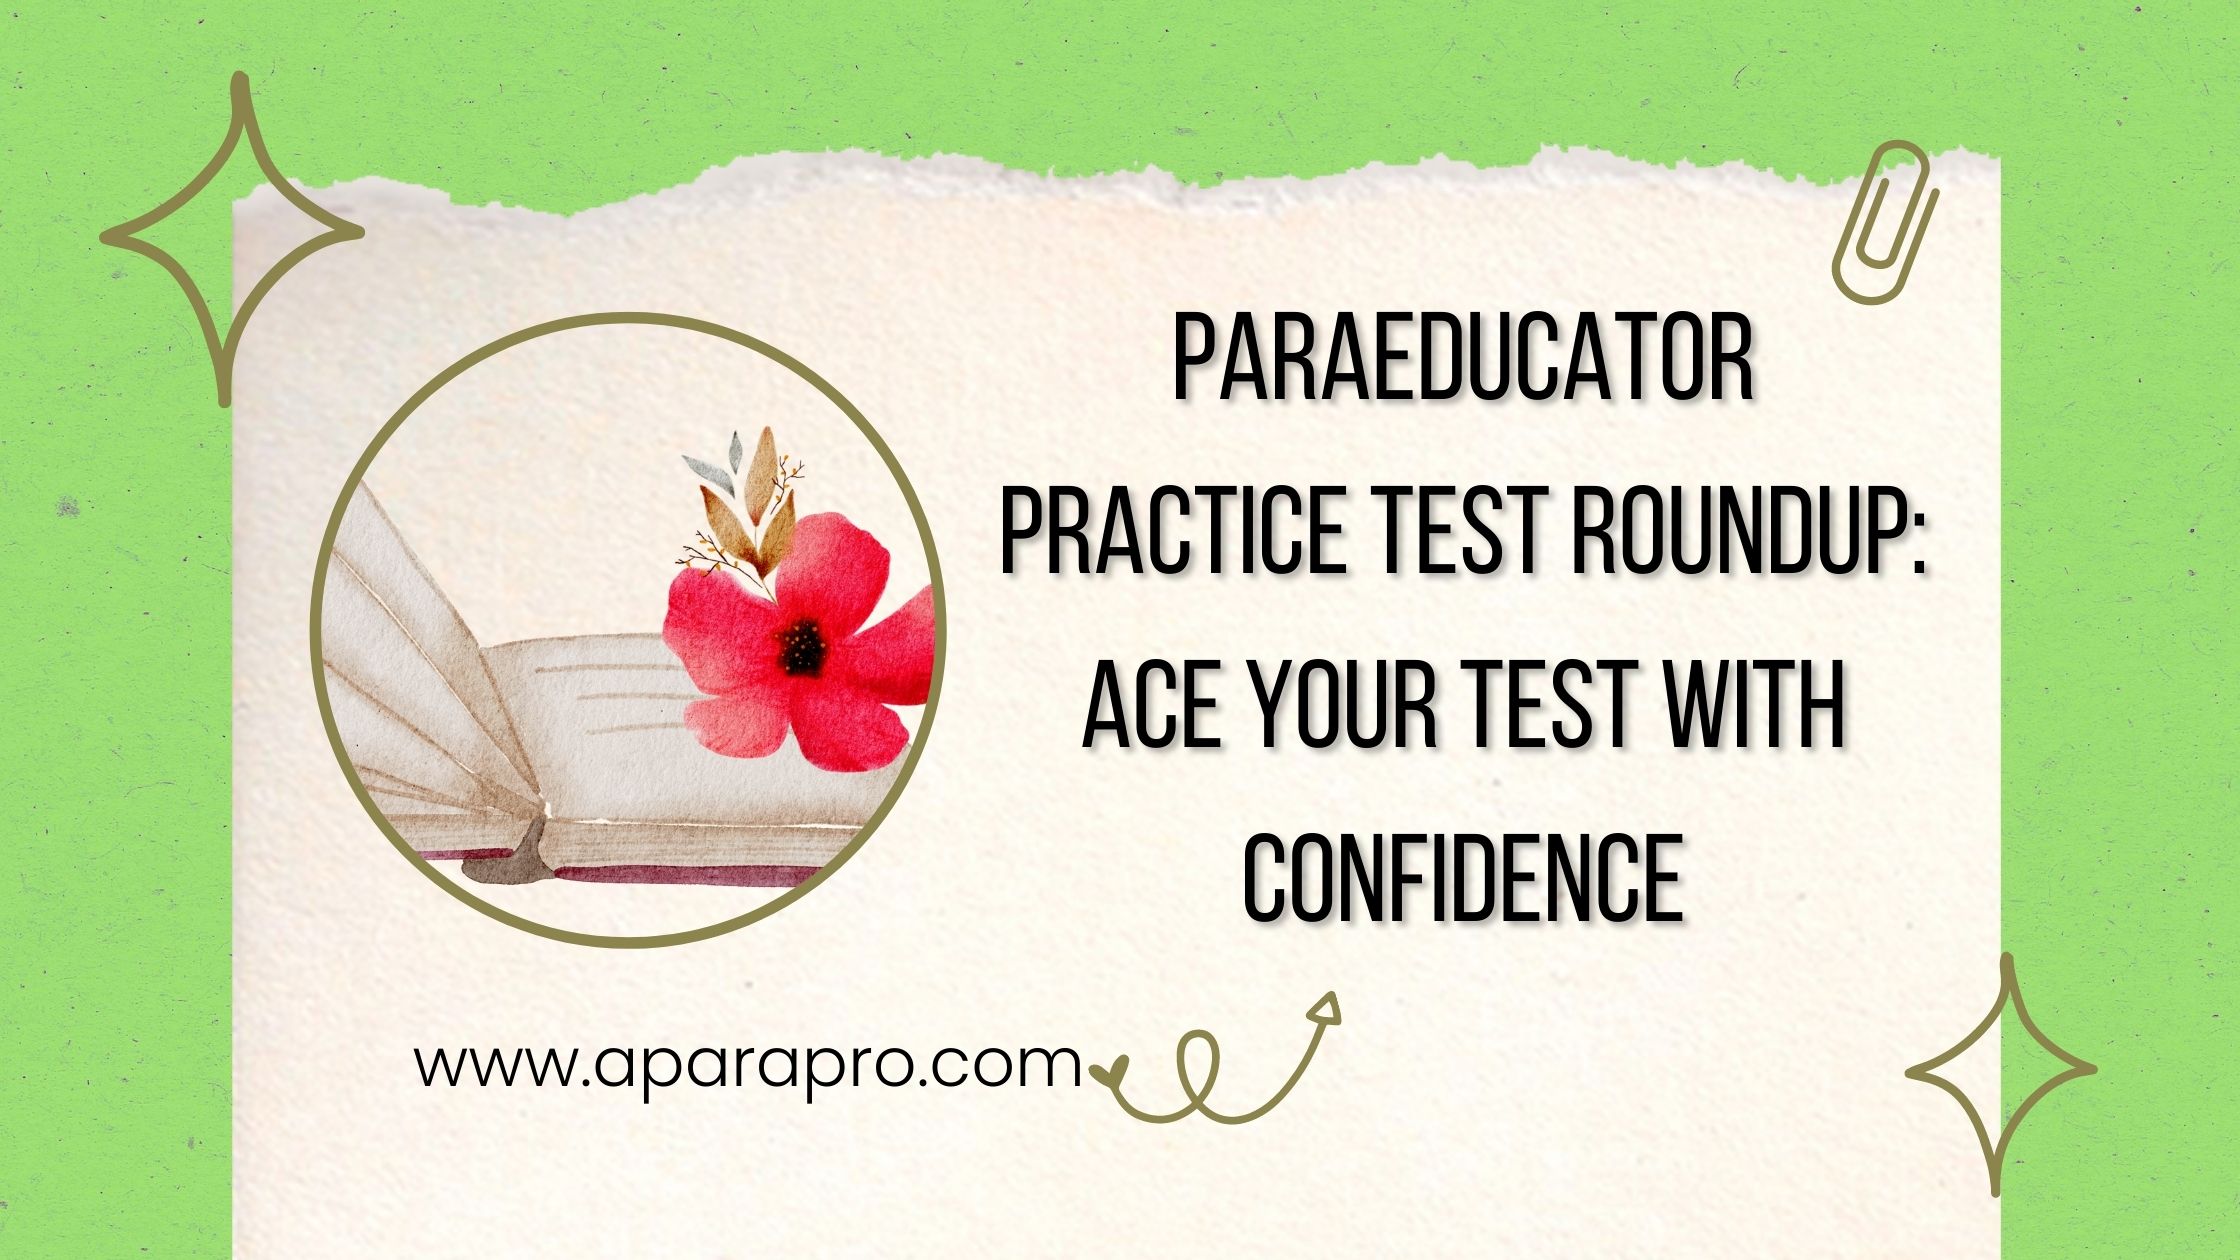 Paraeducator-Practice-Test-Roundup-Ace-your-Test-with-Confidence